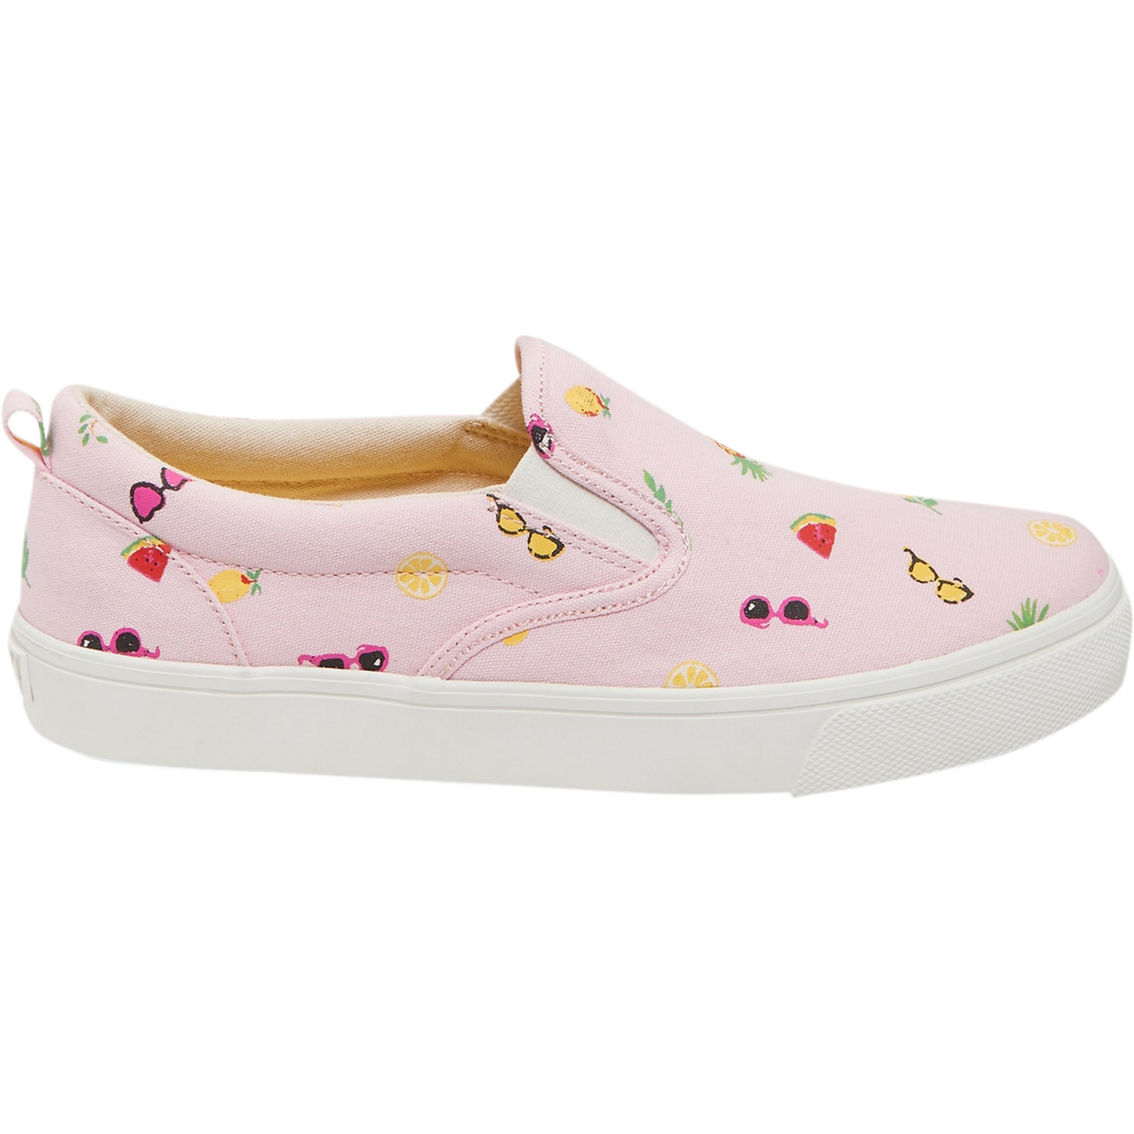 Old Navy Girls Canvas Slip-On Sneakers - Image 2 of 3